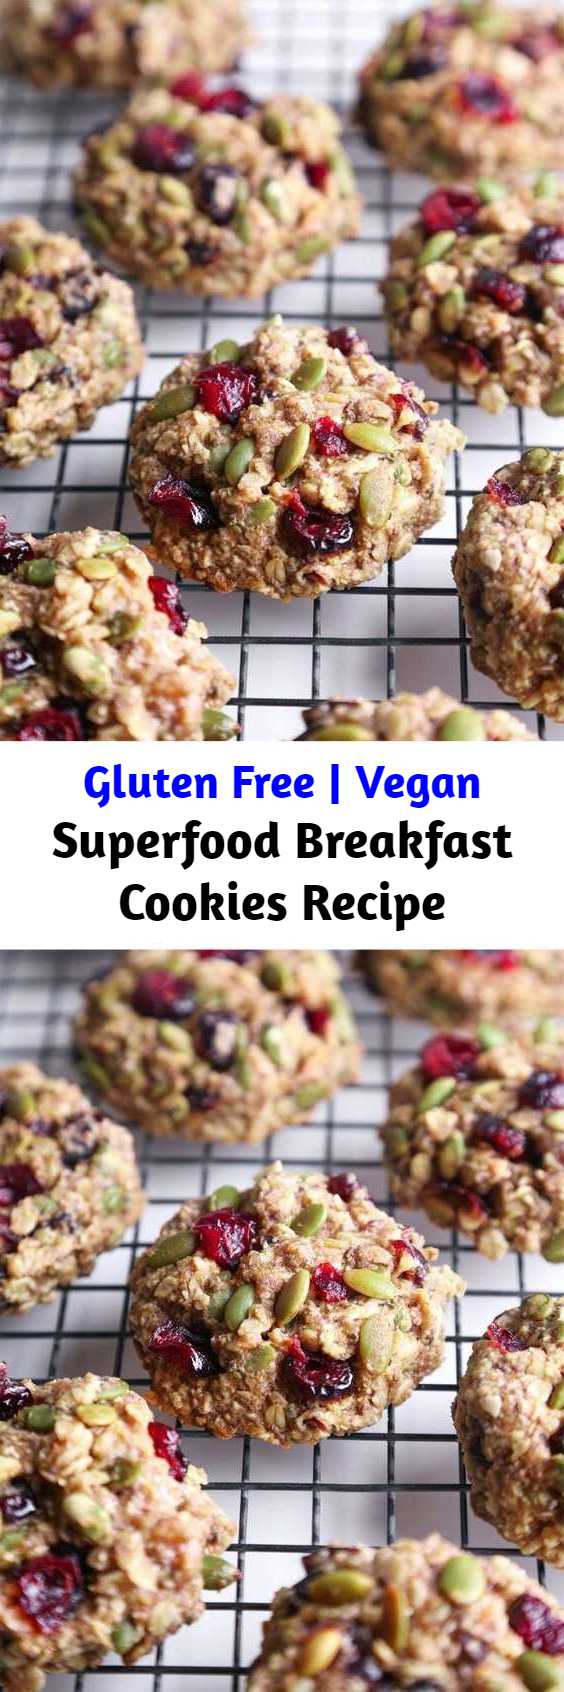 Superfood Breakfast Cookies Recipe - These cookies are jam-packed with nutritious ingredients and healthy enough for breakfast on the go! They're free of gluten, dairy, & refined sugar, and also vegan friendly!